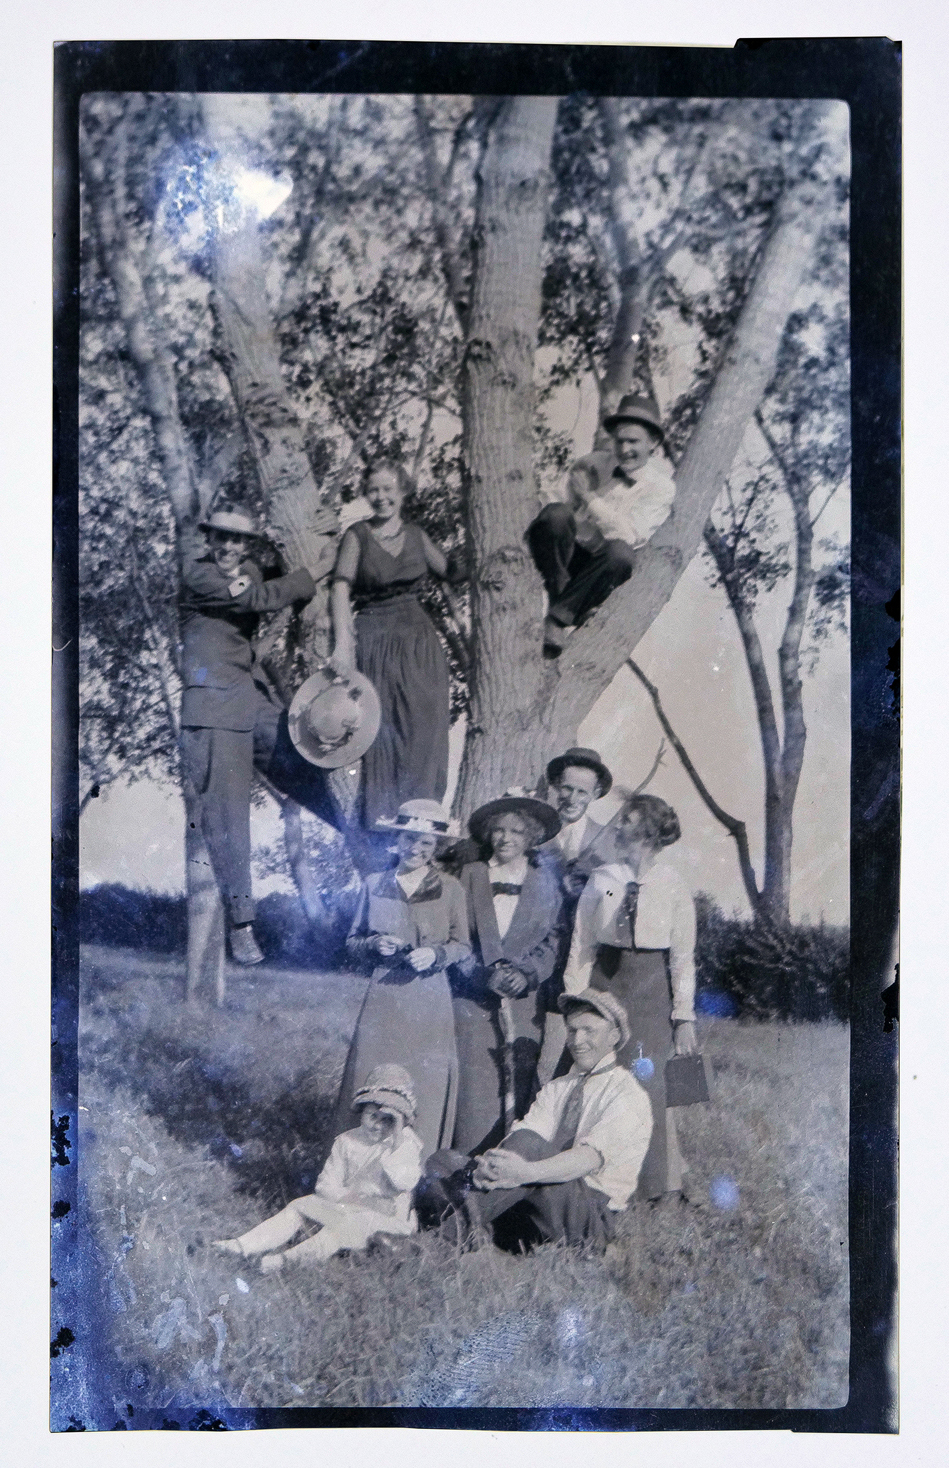 This photograph shows nine jovial people collected in period clothes gathered around a tree, with a few people perched in the branches of the tree.